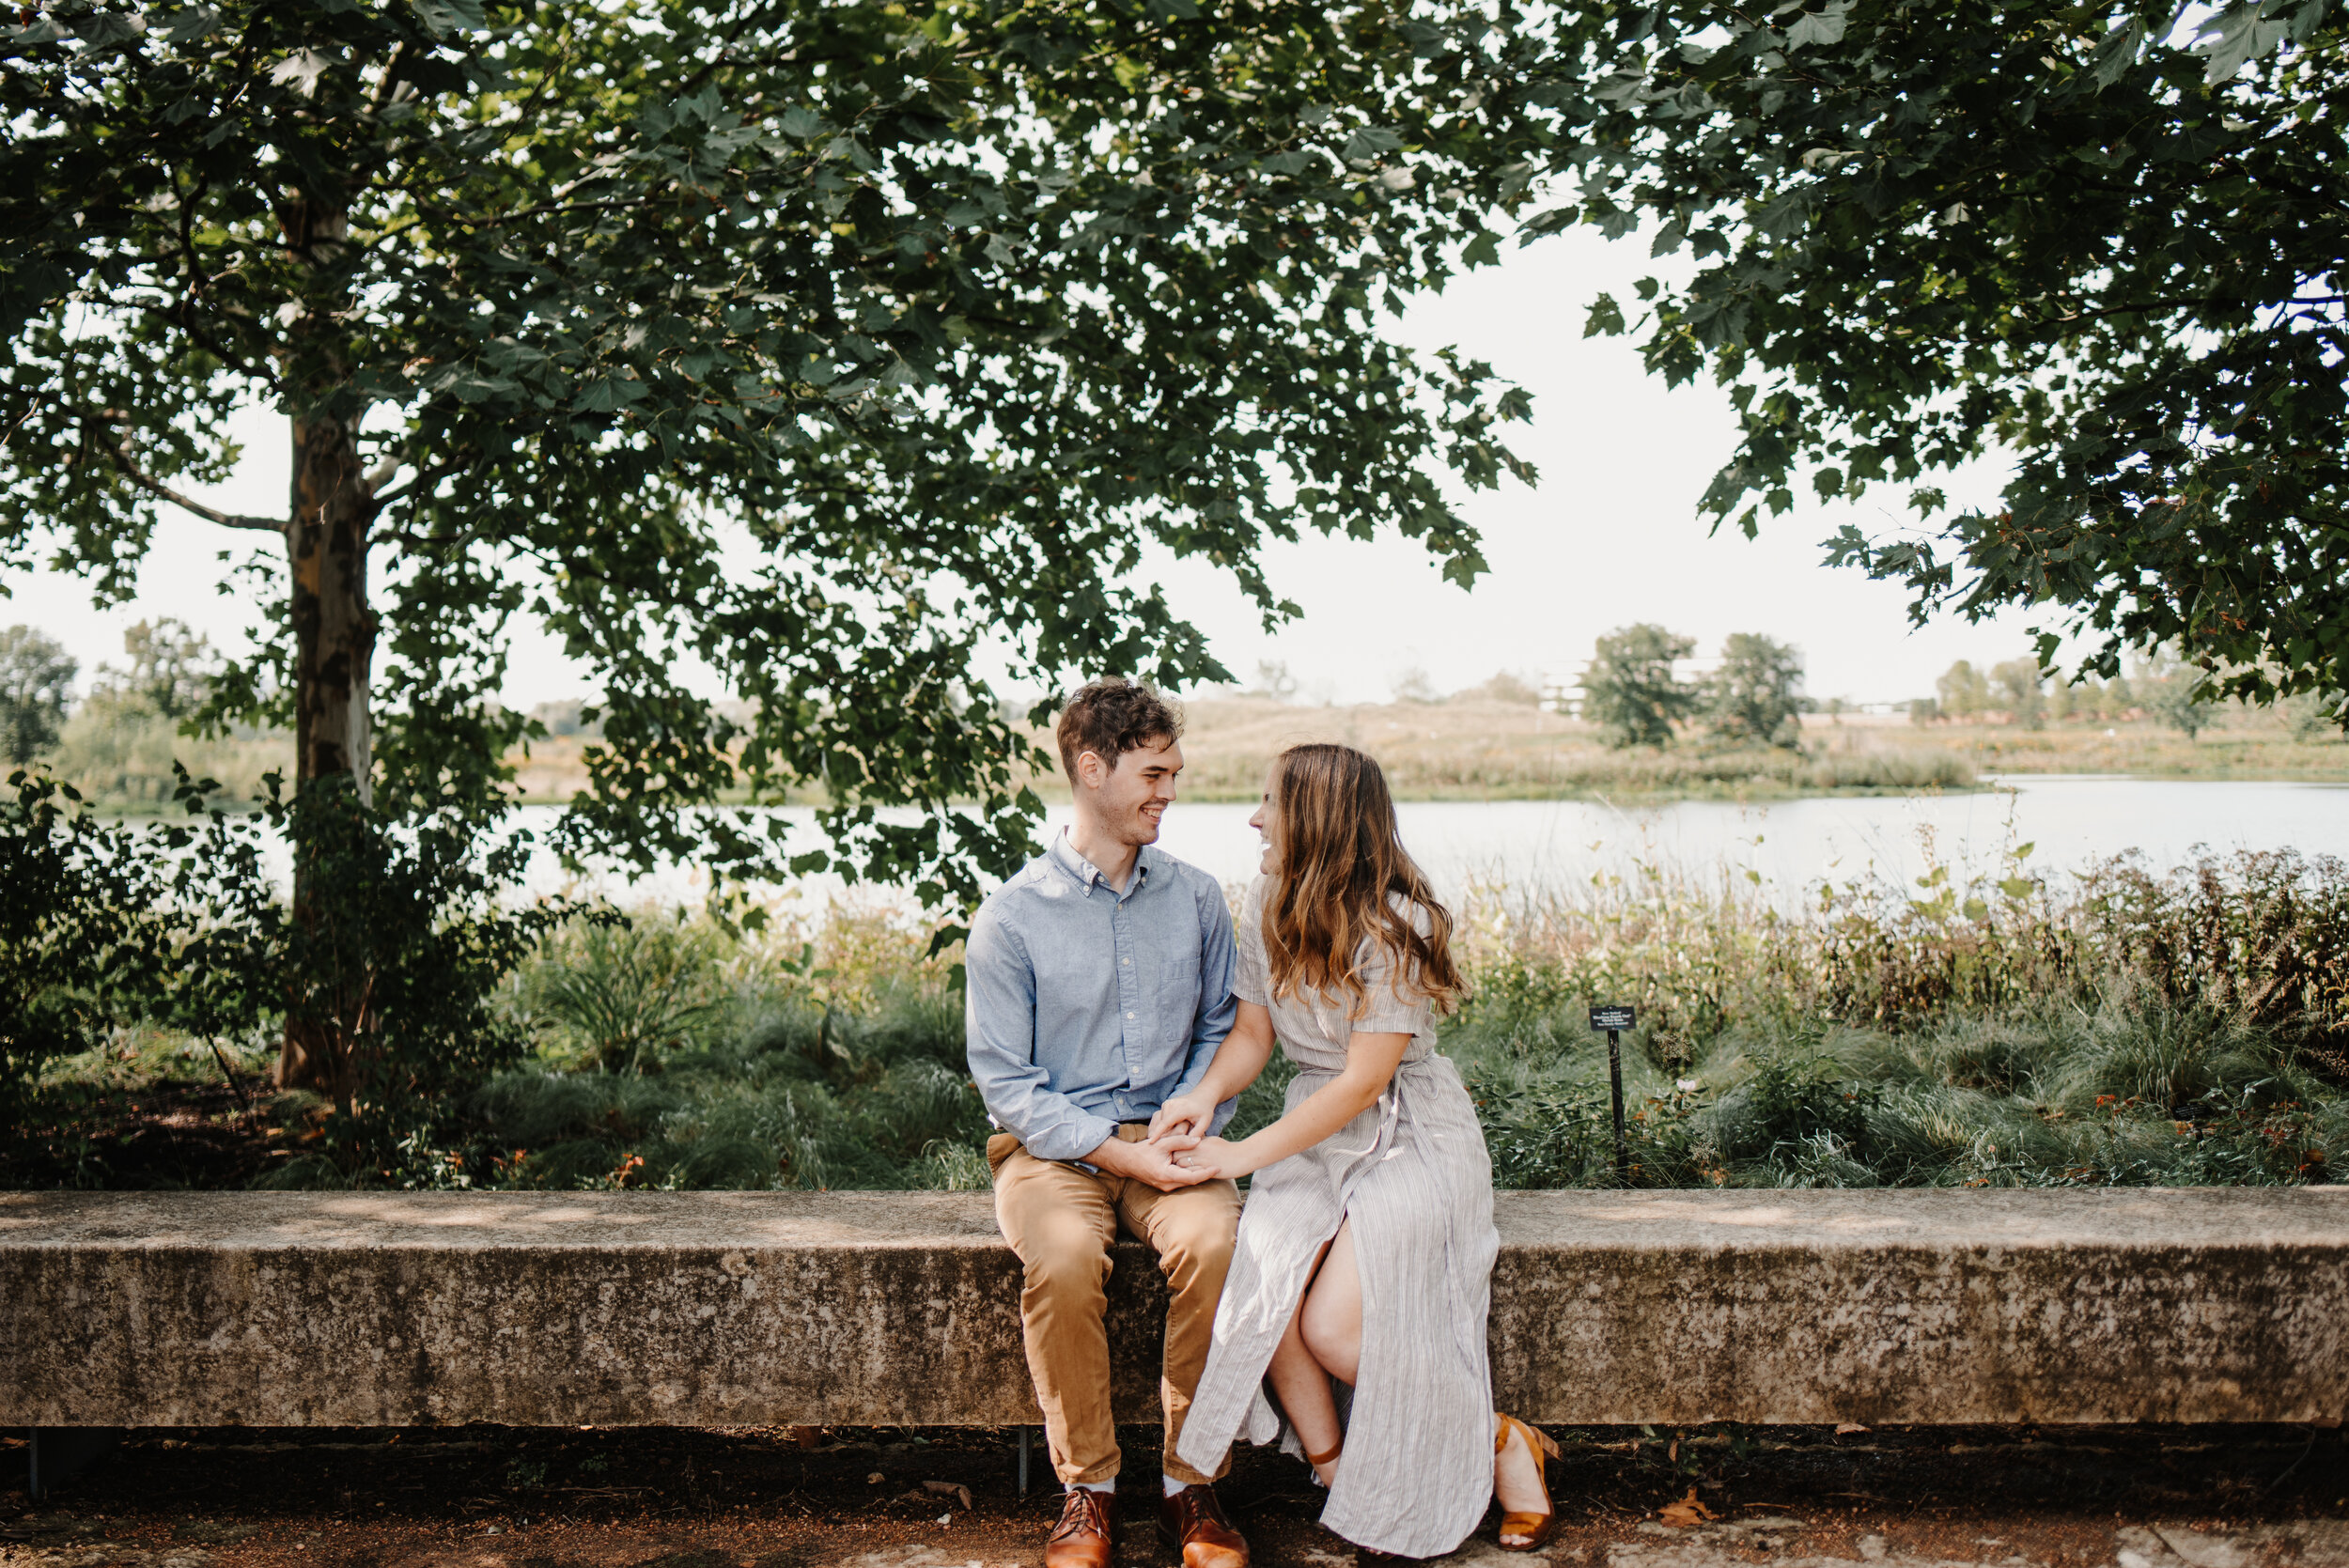 Sunny Botanic Garden Engagement Session captured by Dana Bell Photography | CHI thee WED